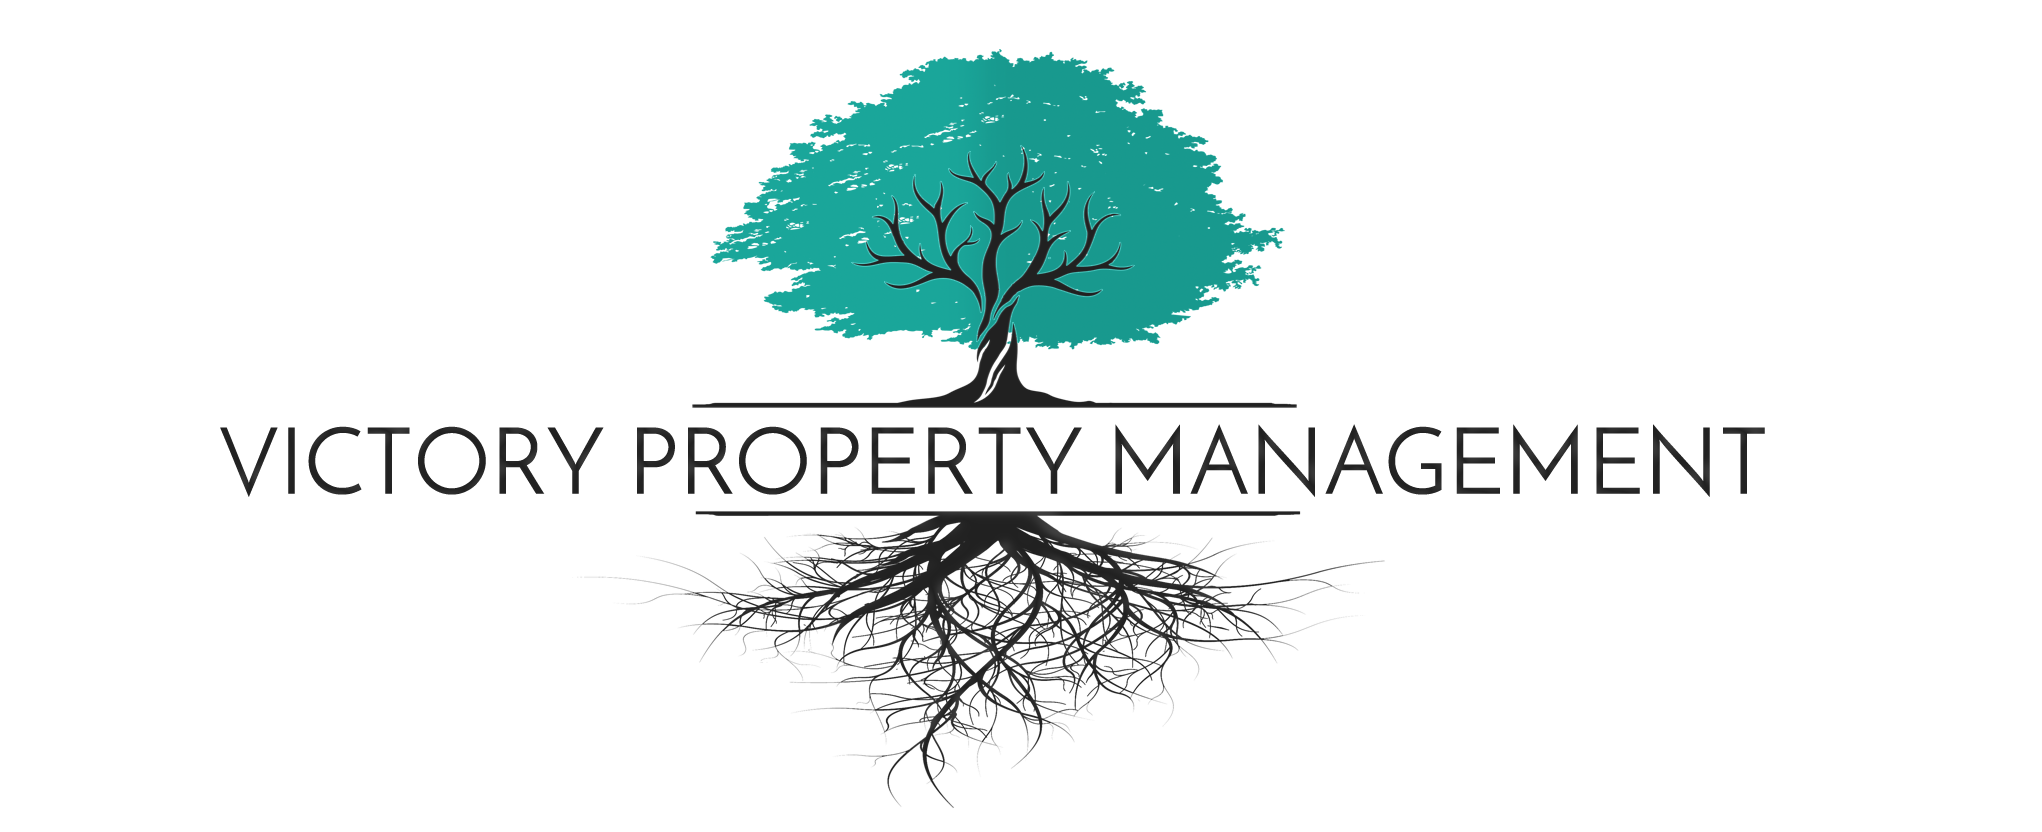 acorn and oak property management raleigh nc